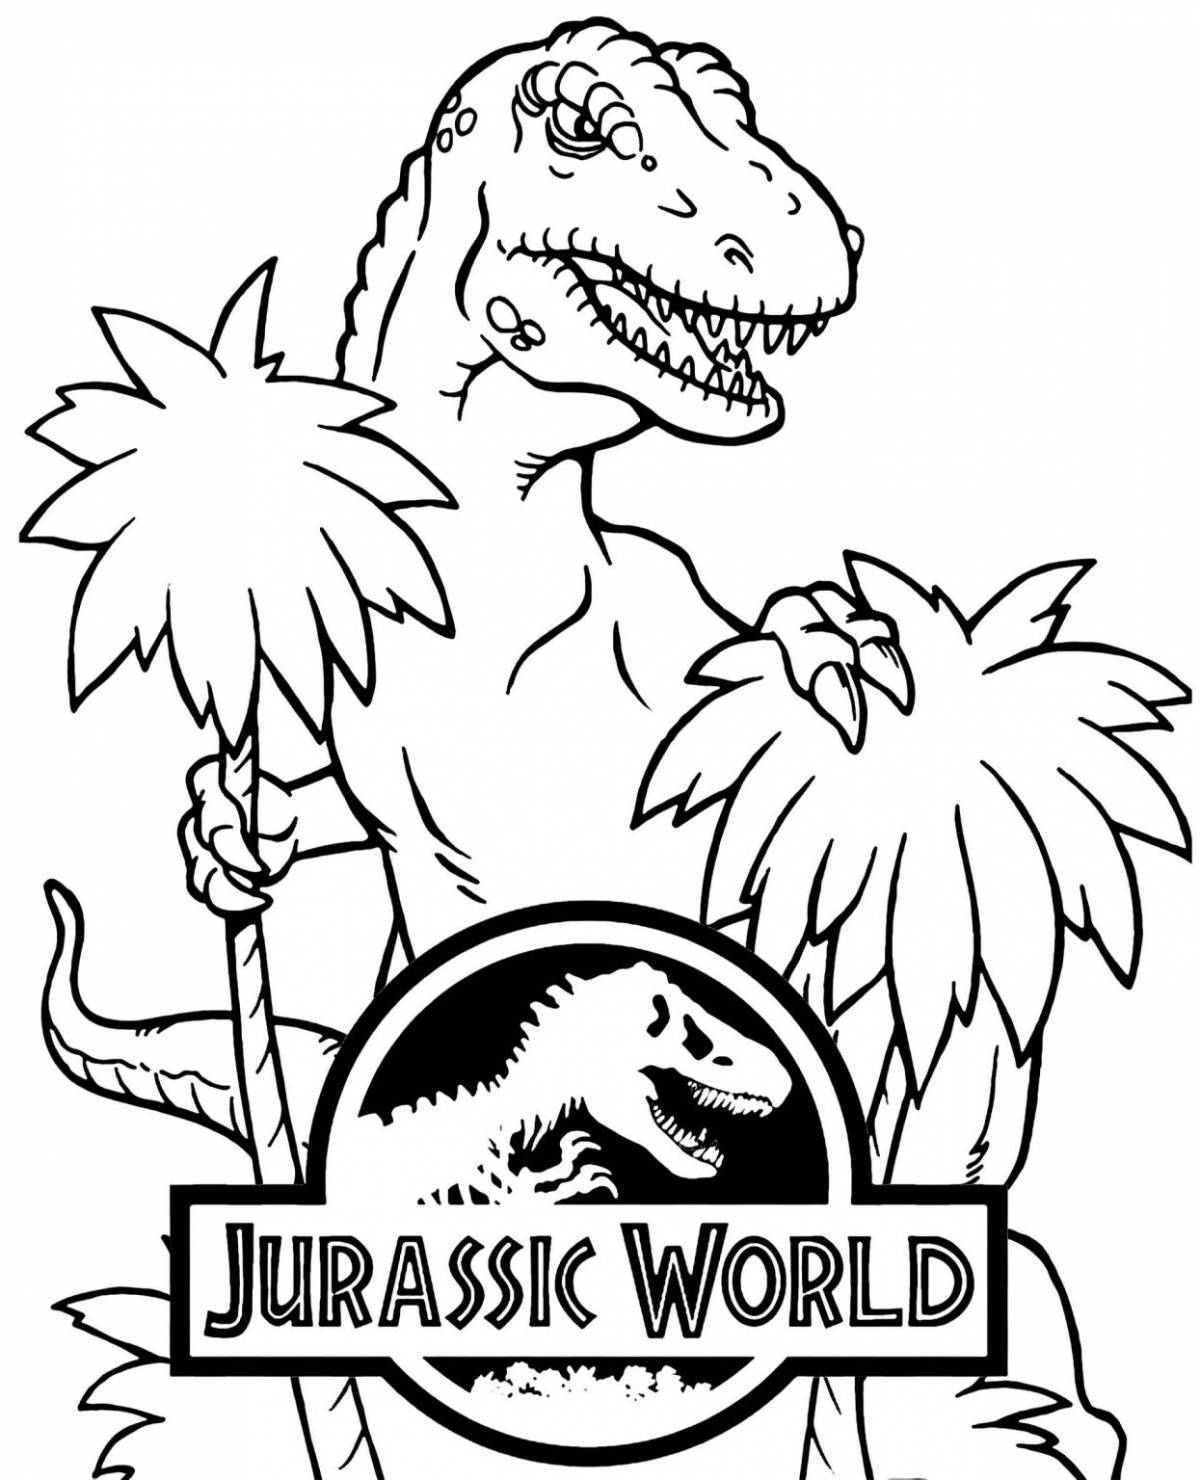 Exciting Jurassic world coloring book